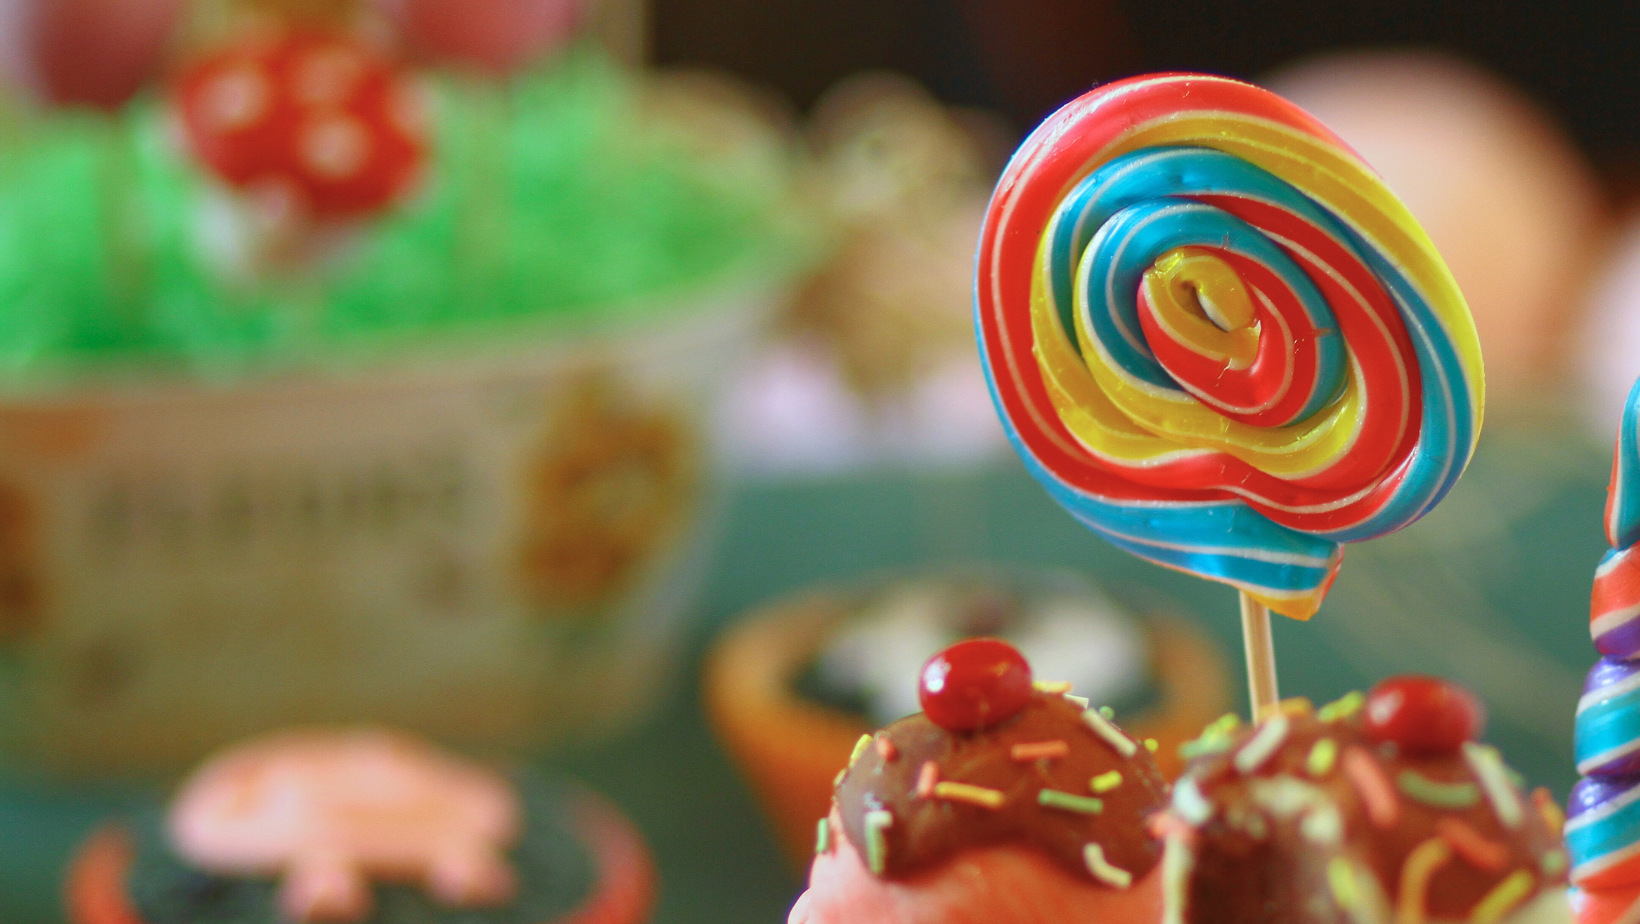 Blog title image - bright candy and sweets